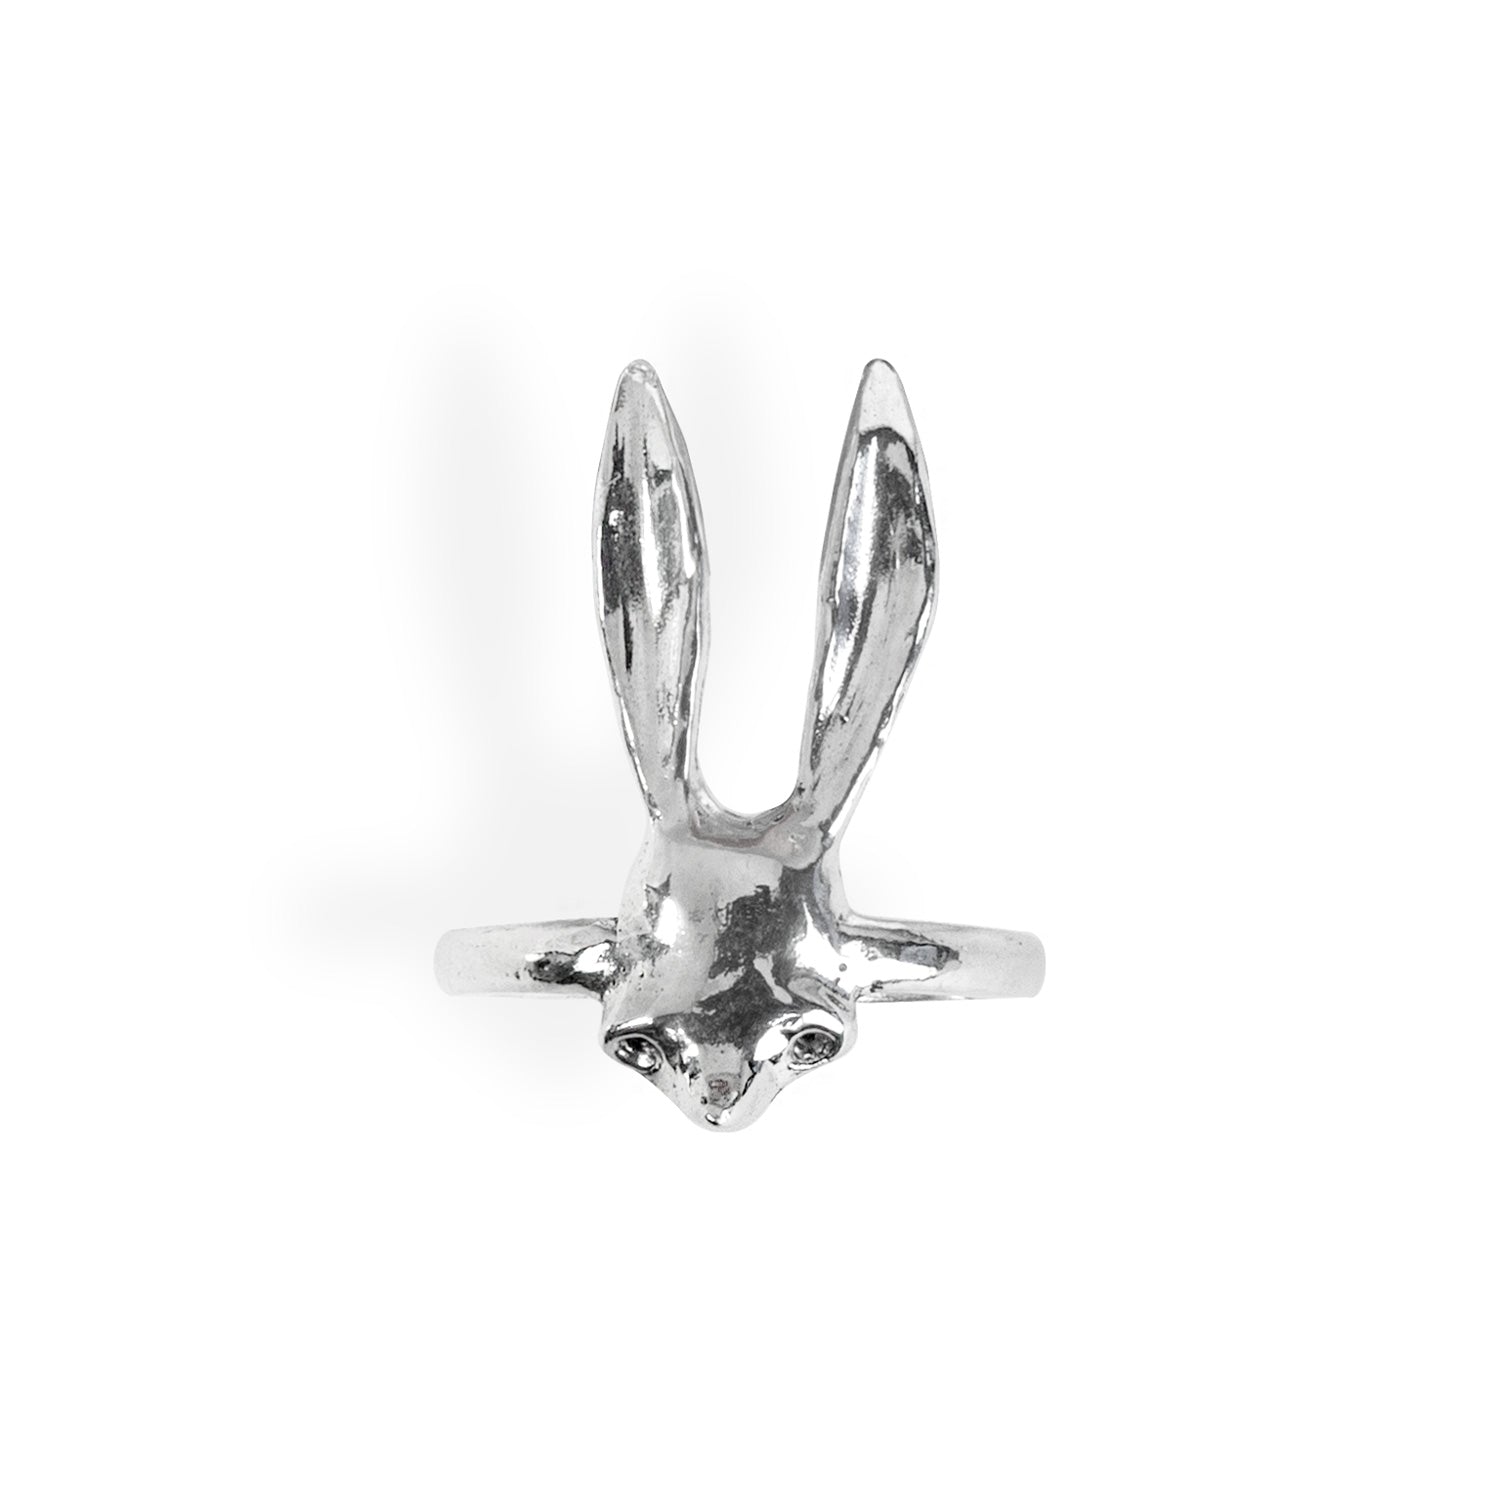 Sally Mask Silver Ring